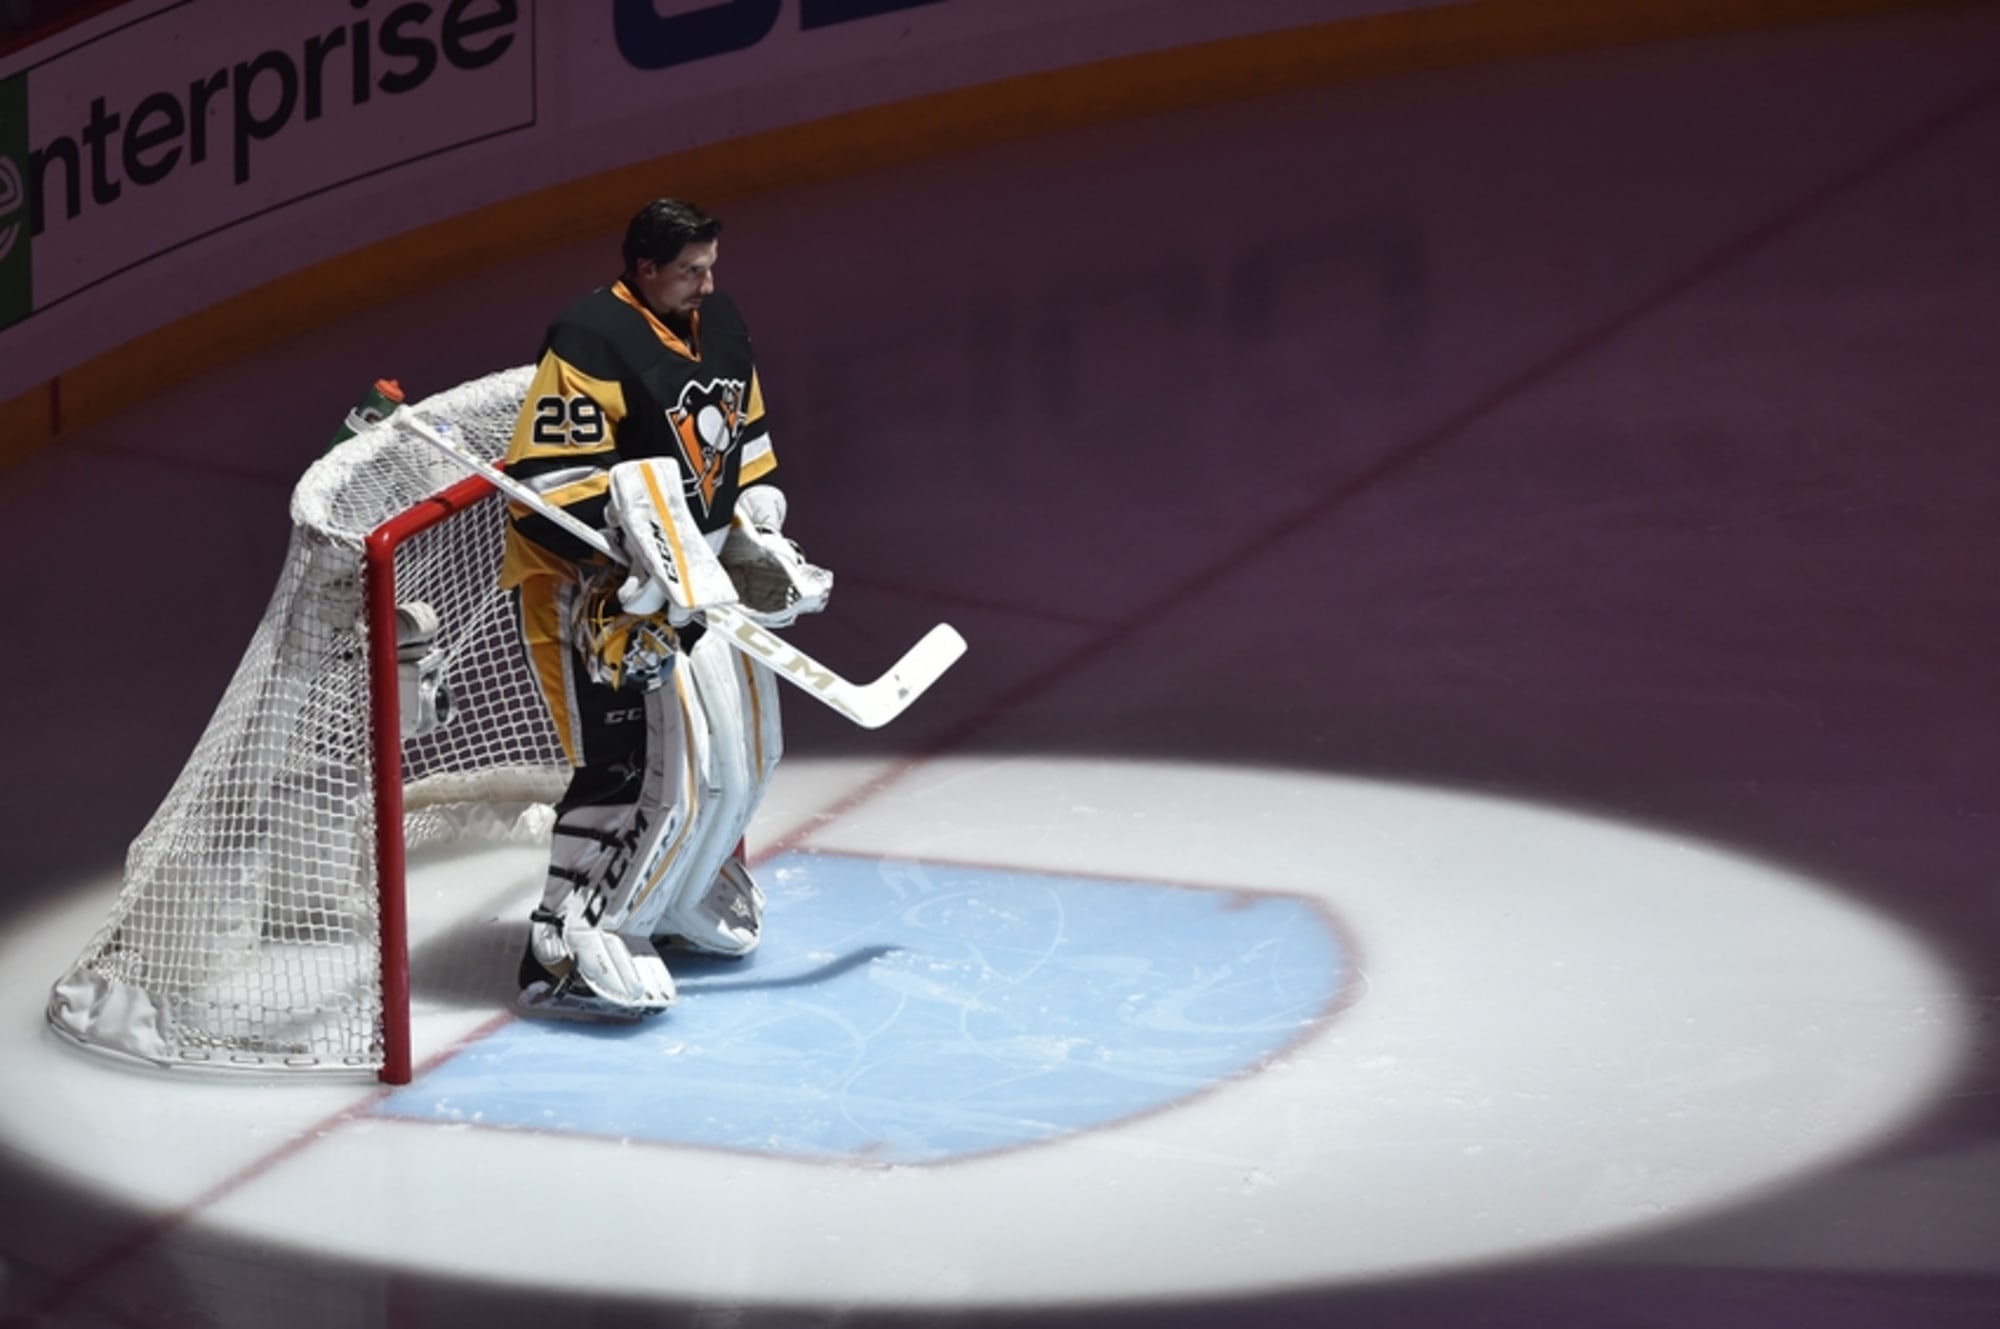 Top 5 Teams Marc-Andre Fleury Gets Traded To